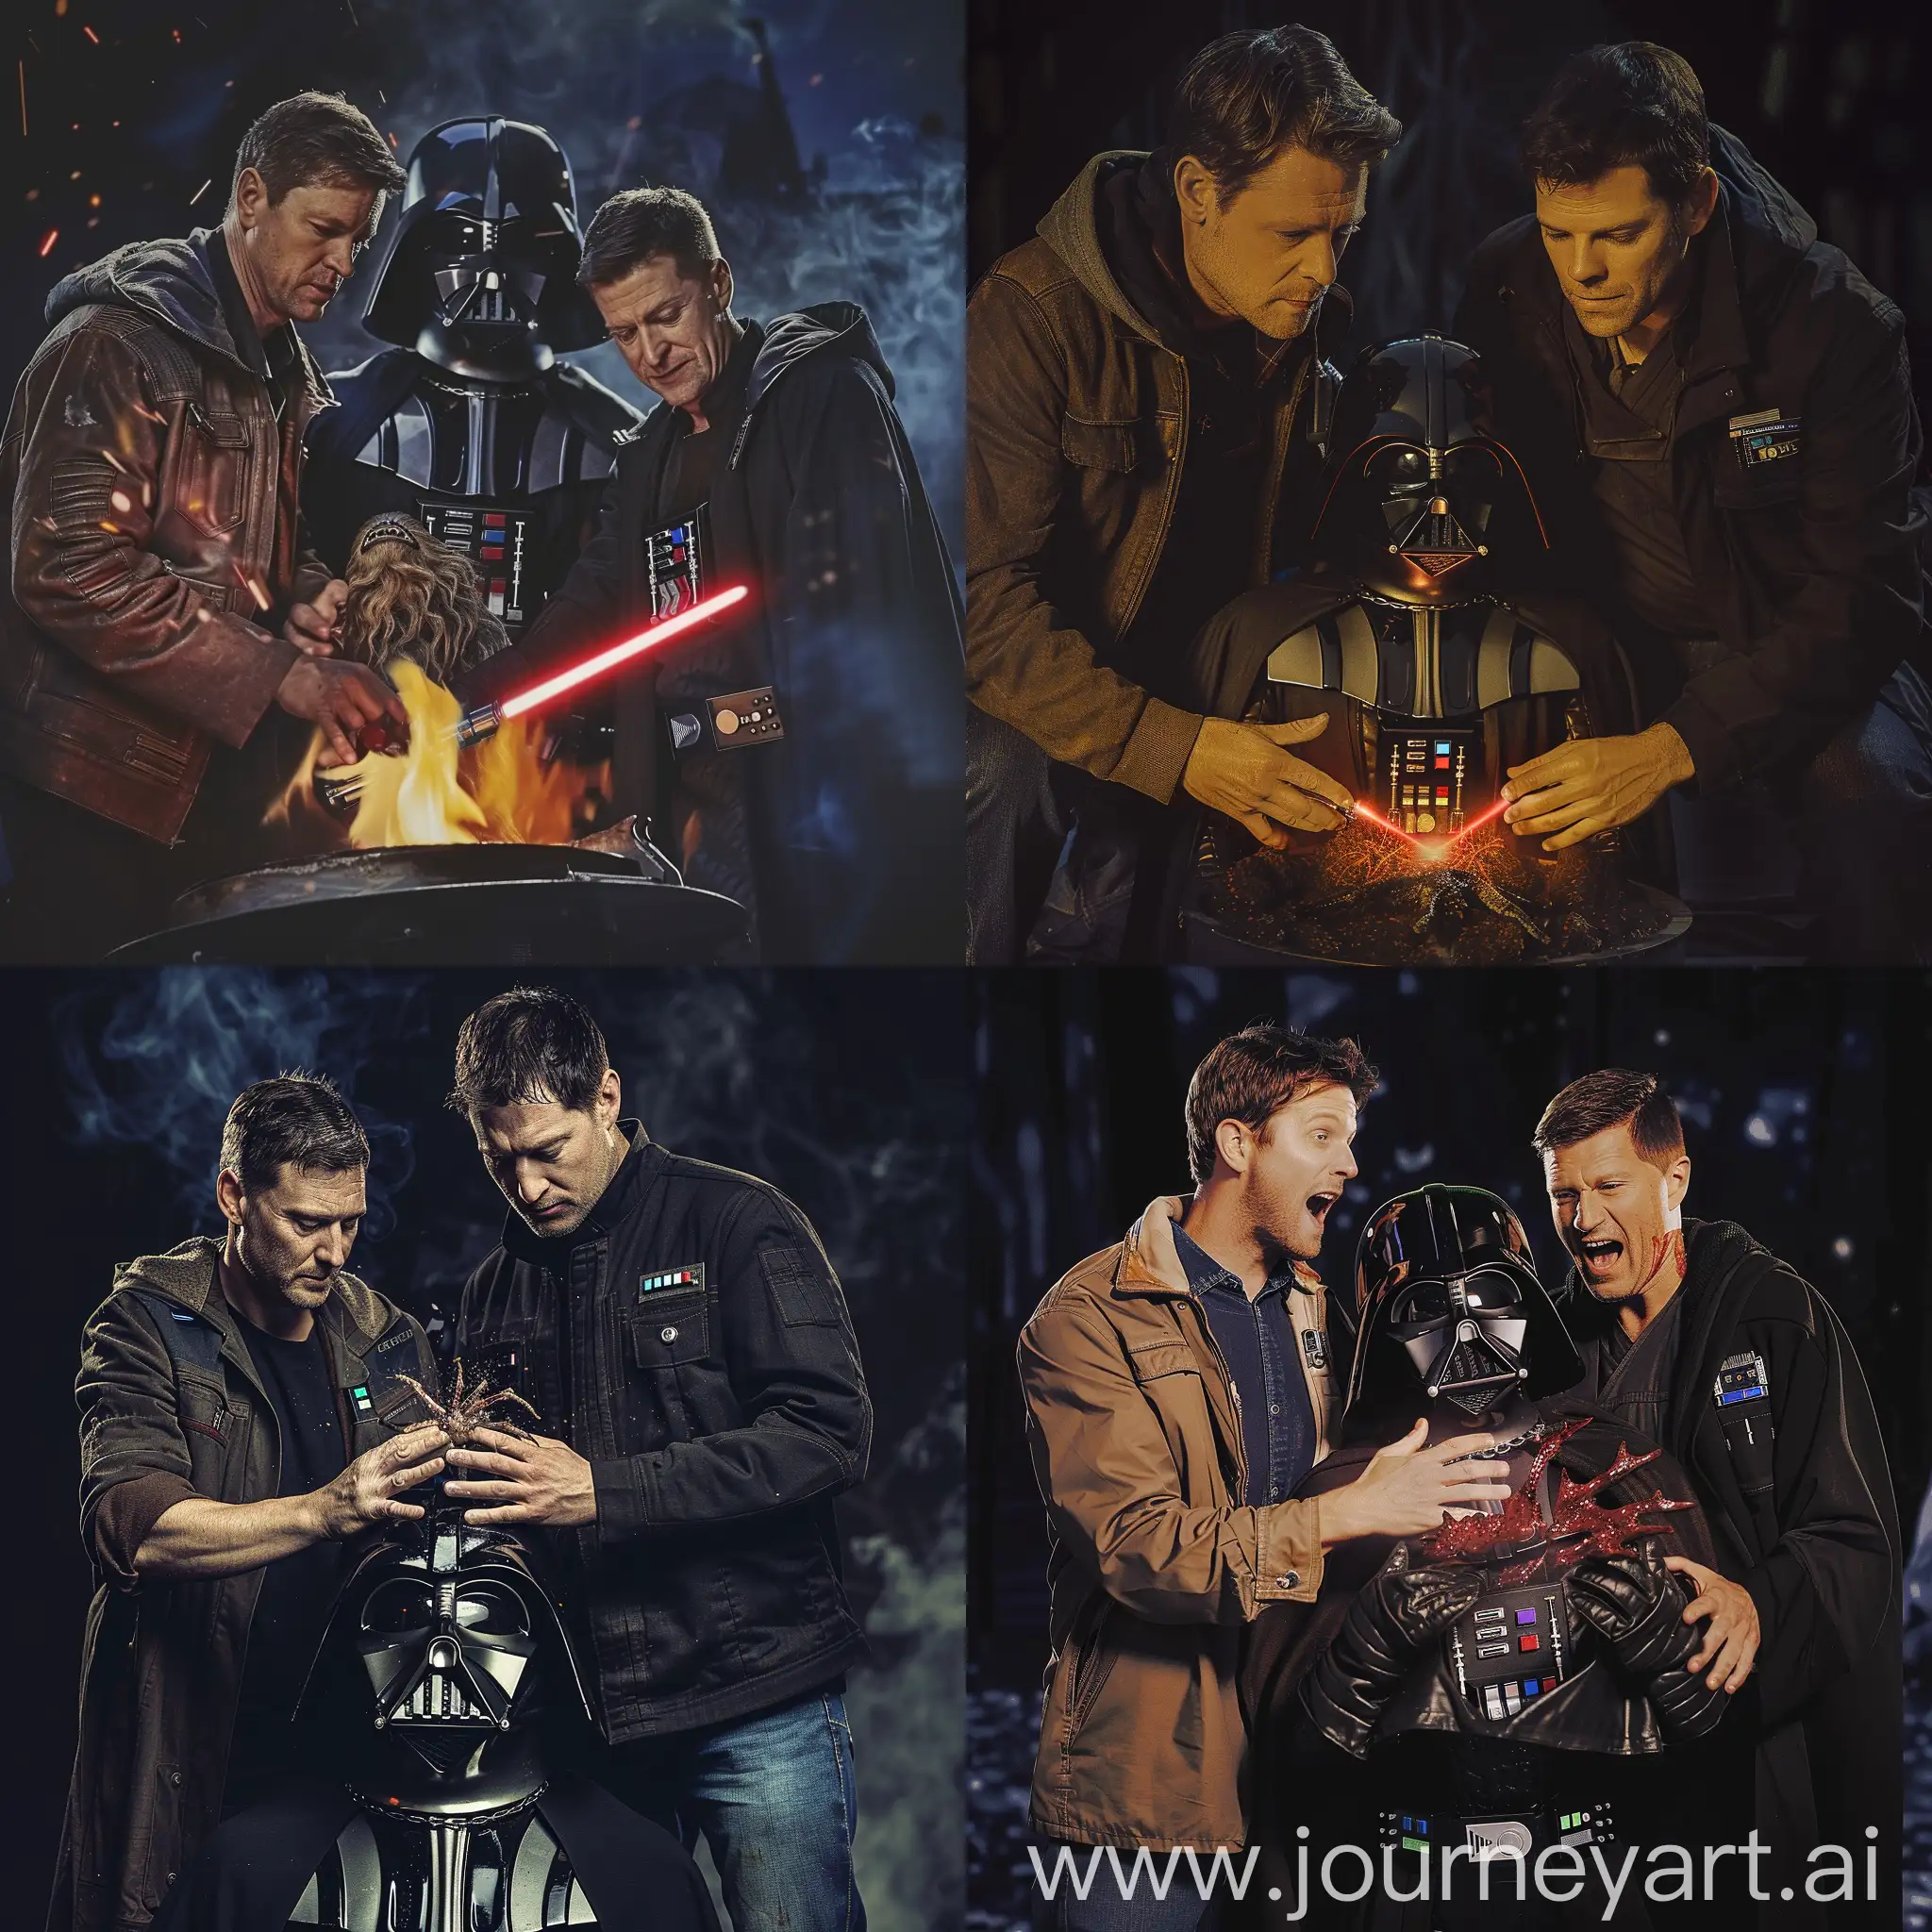 Sam and Dean Winchesters exorcising a demon from Darth Vader